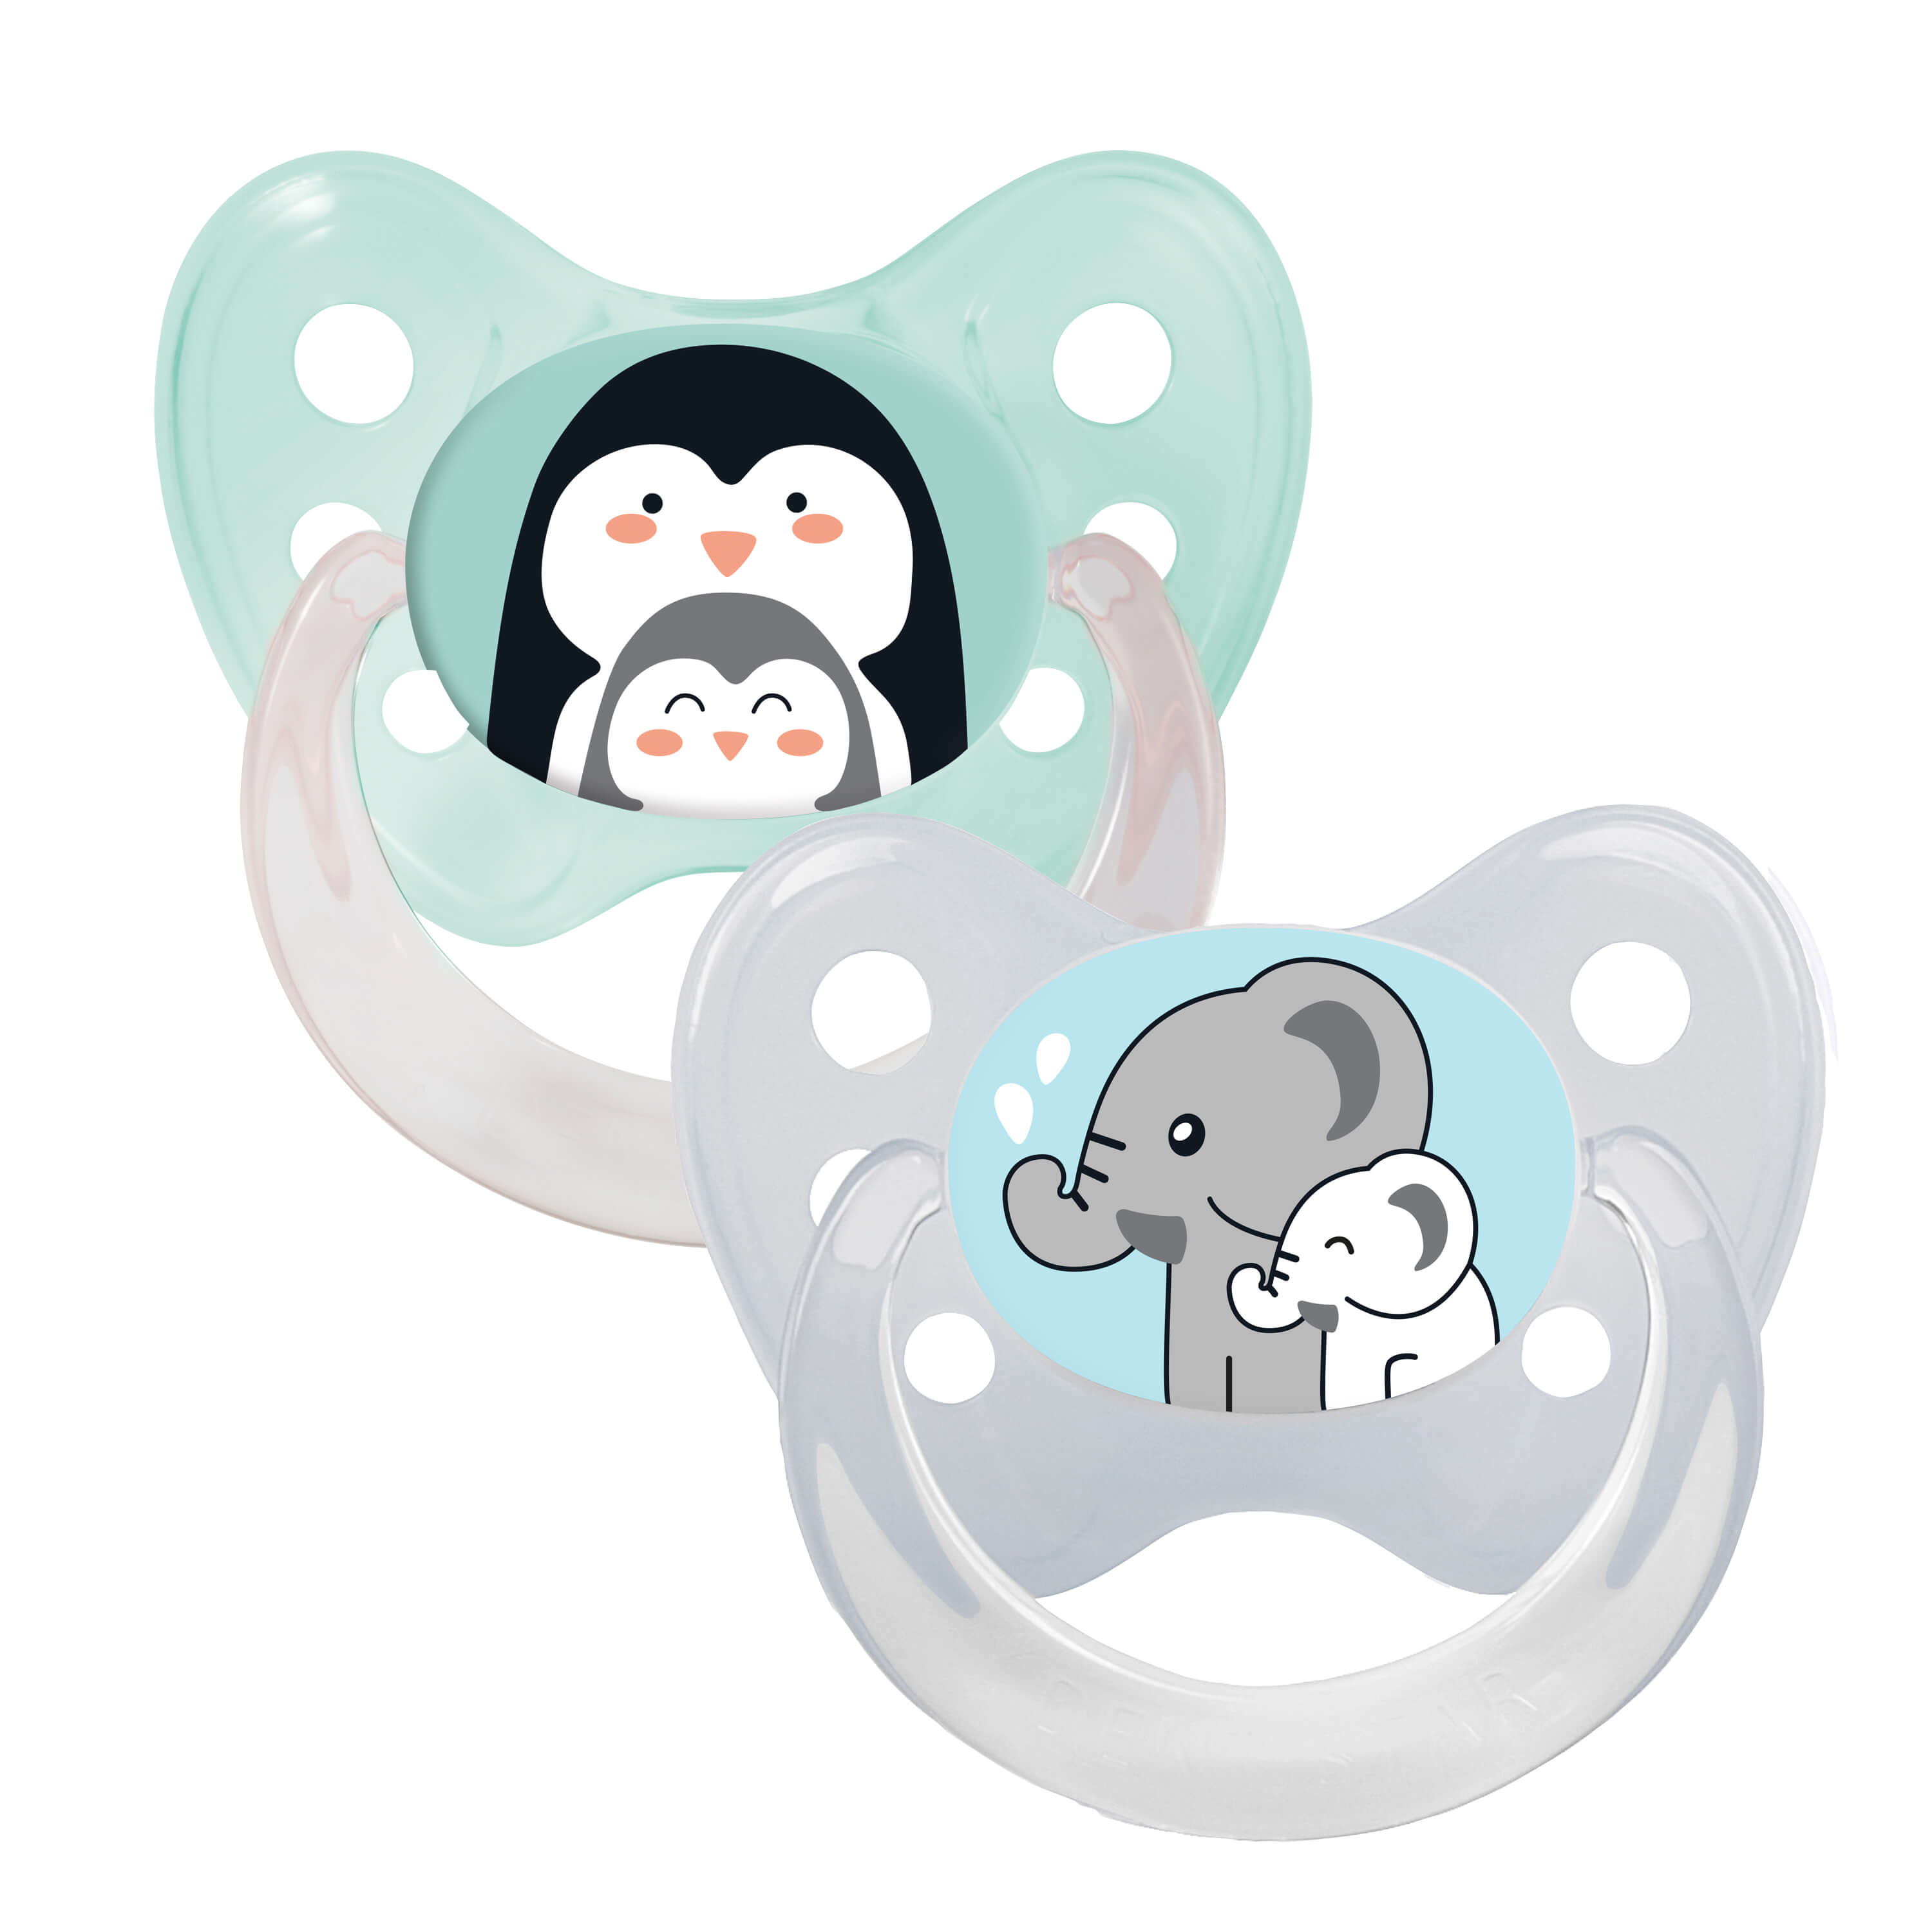 Soother set Penguin & Elephant size 1 